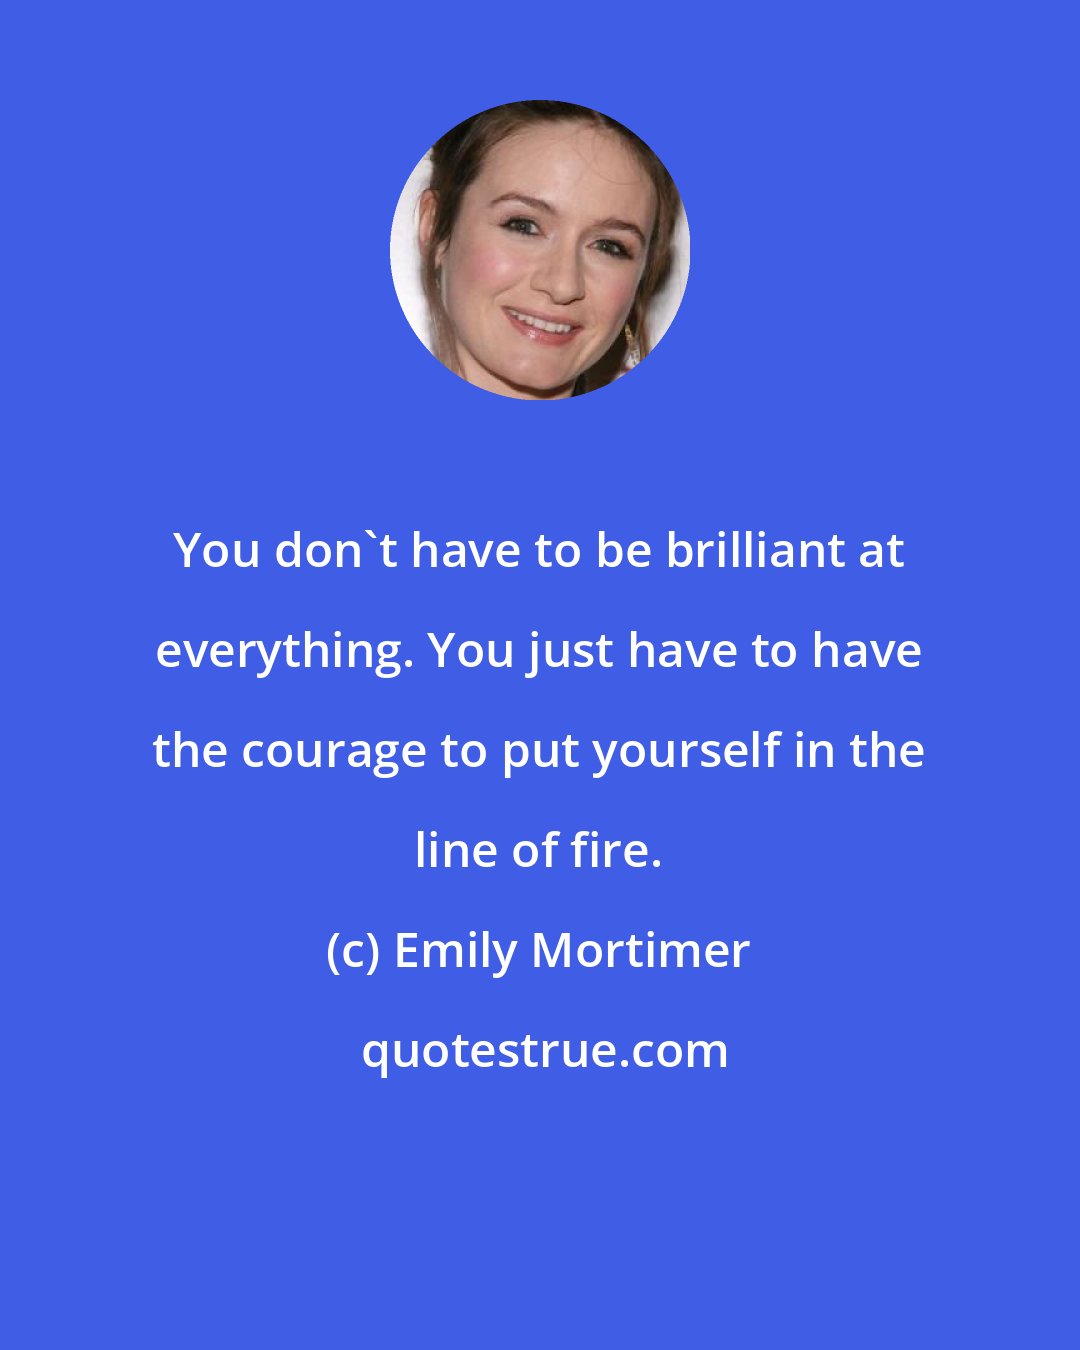 Emily Mortimer: You don't have to be brilliant at everything. You just have to have the courage to put yourself in the line of fire.